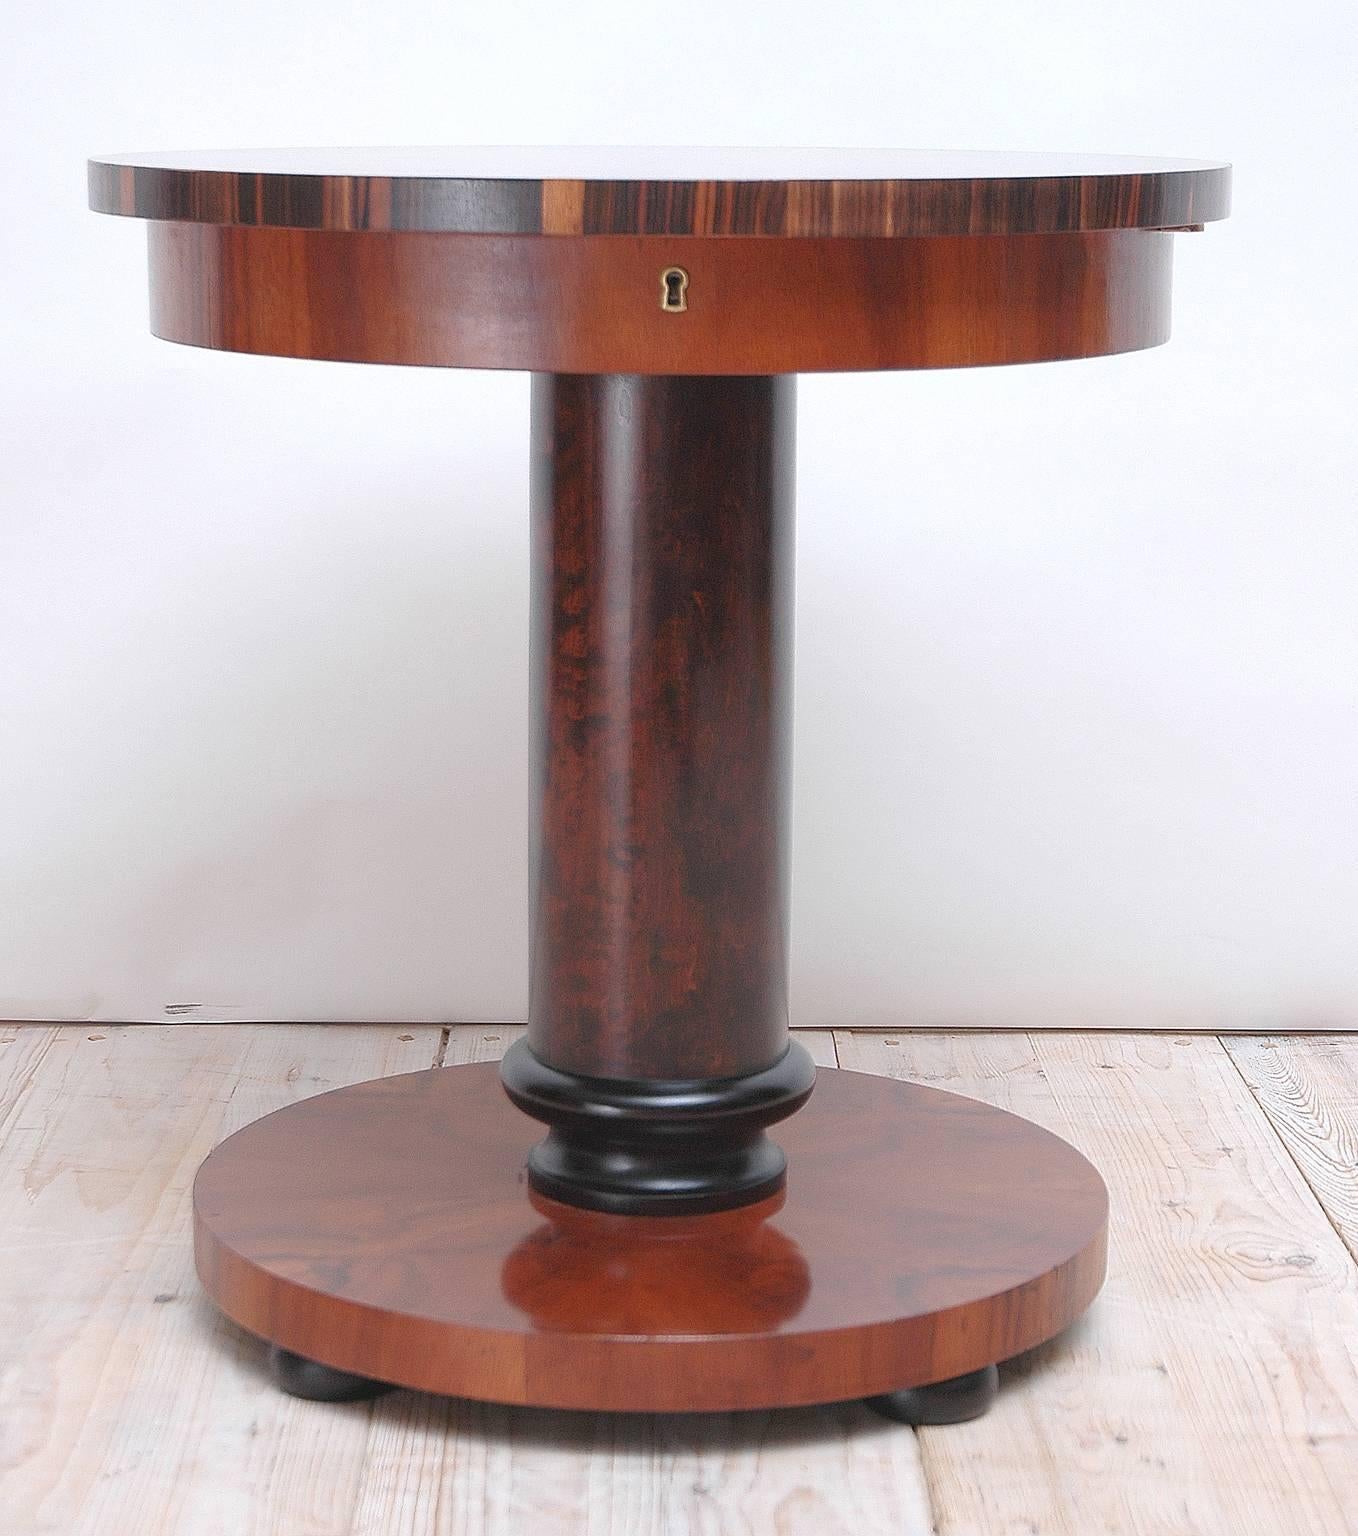 A round Art Deco end table in Massacre ebony and mahogany with cylindrical pedestal column resting on round base. Top swivels open to reveal interior compartments. Originally sold through, and possibly commissioned by, the Swedish department store